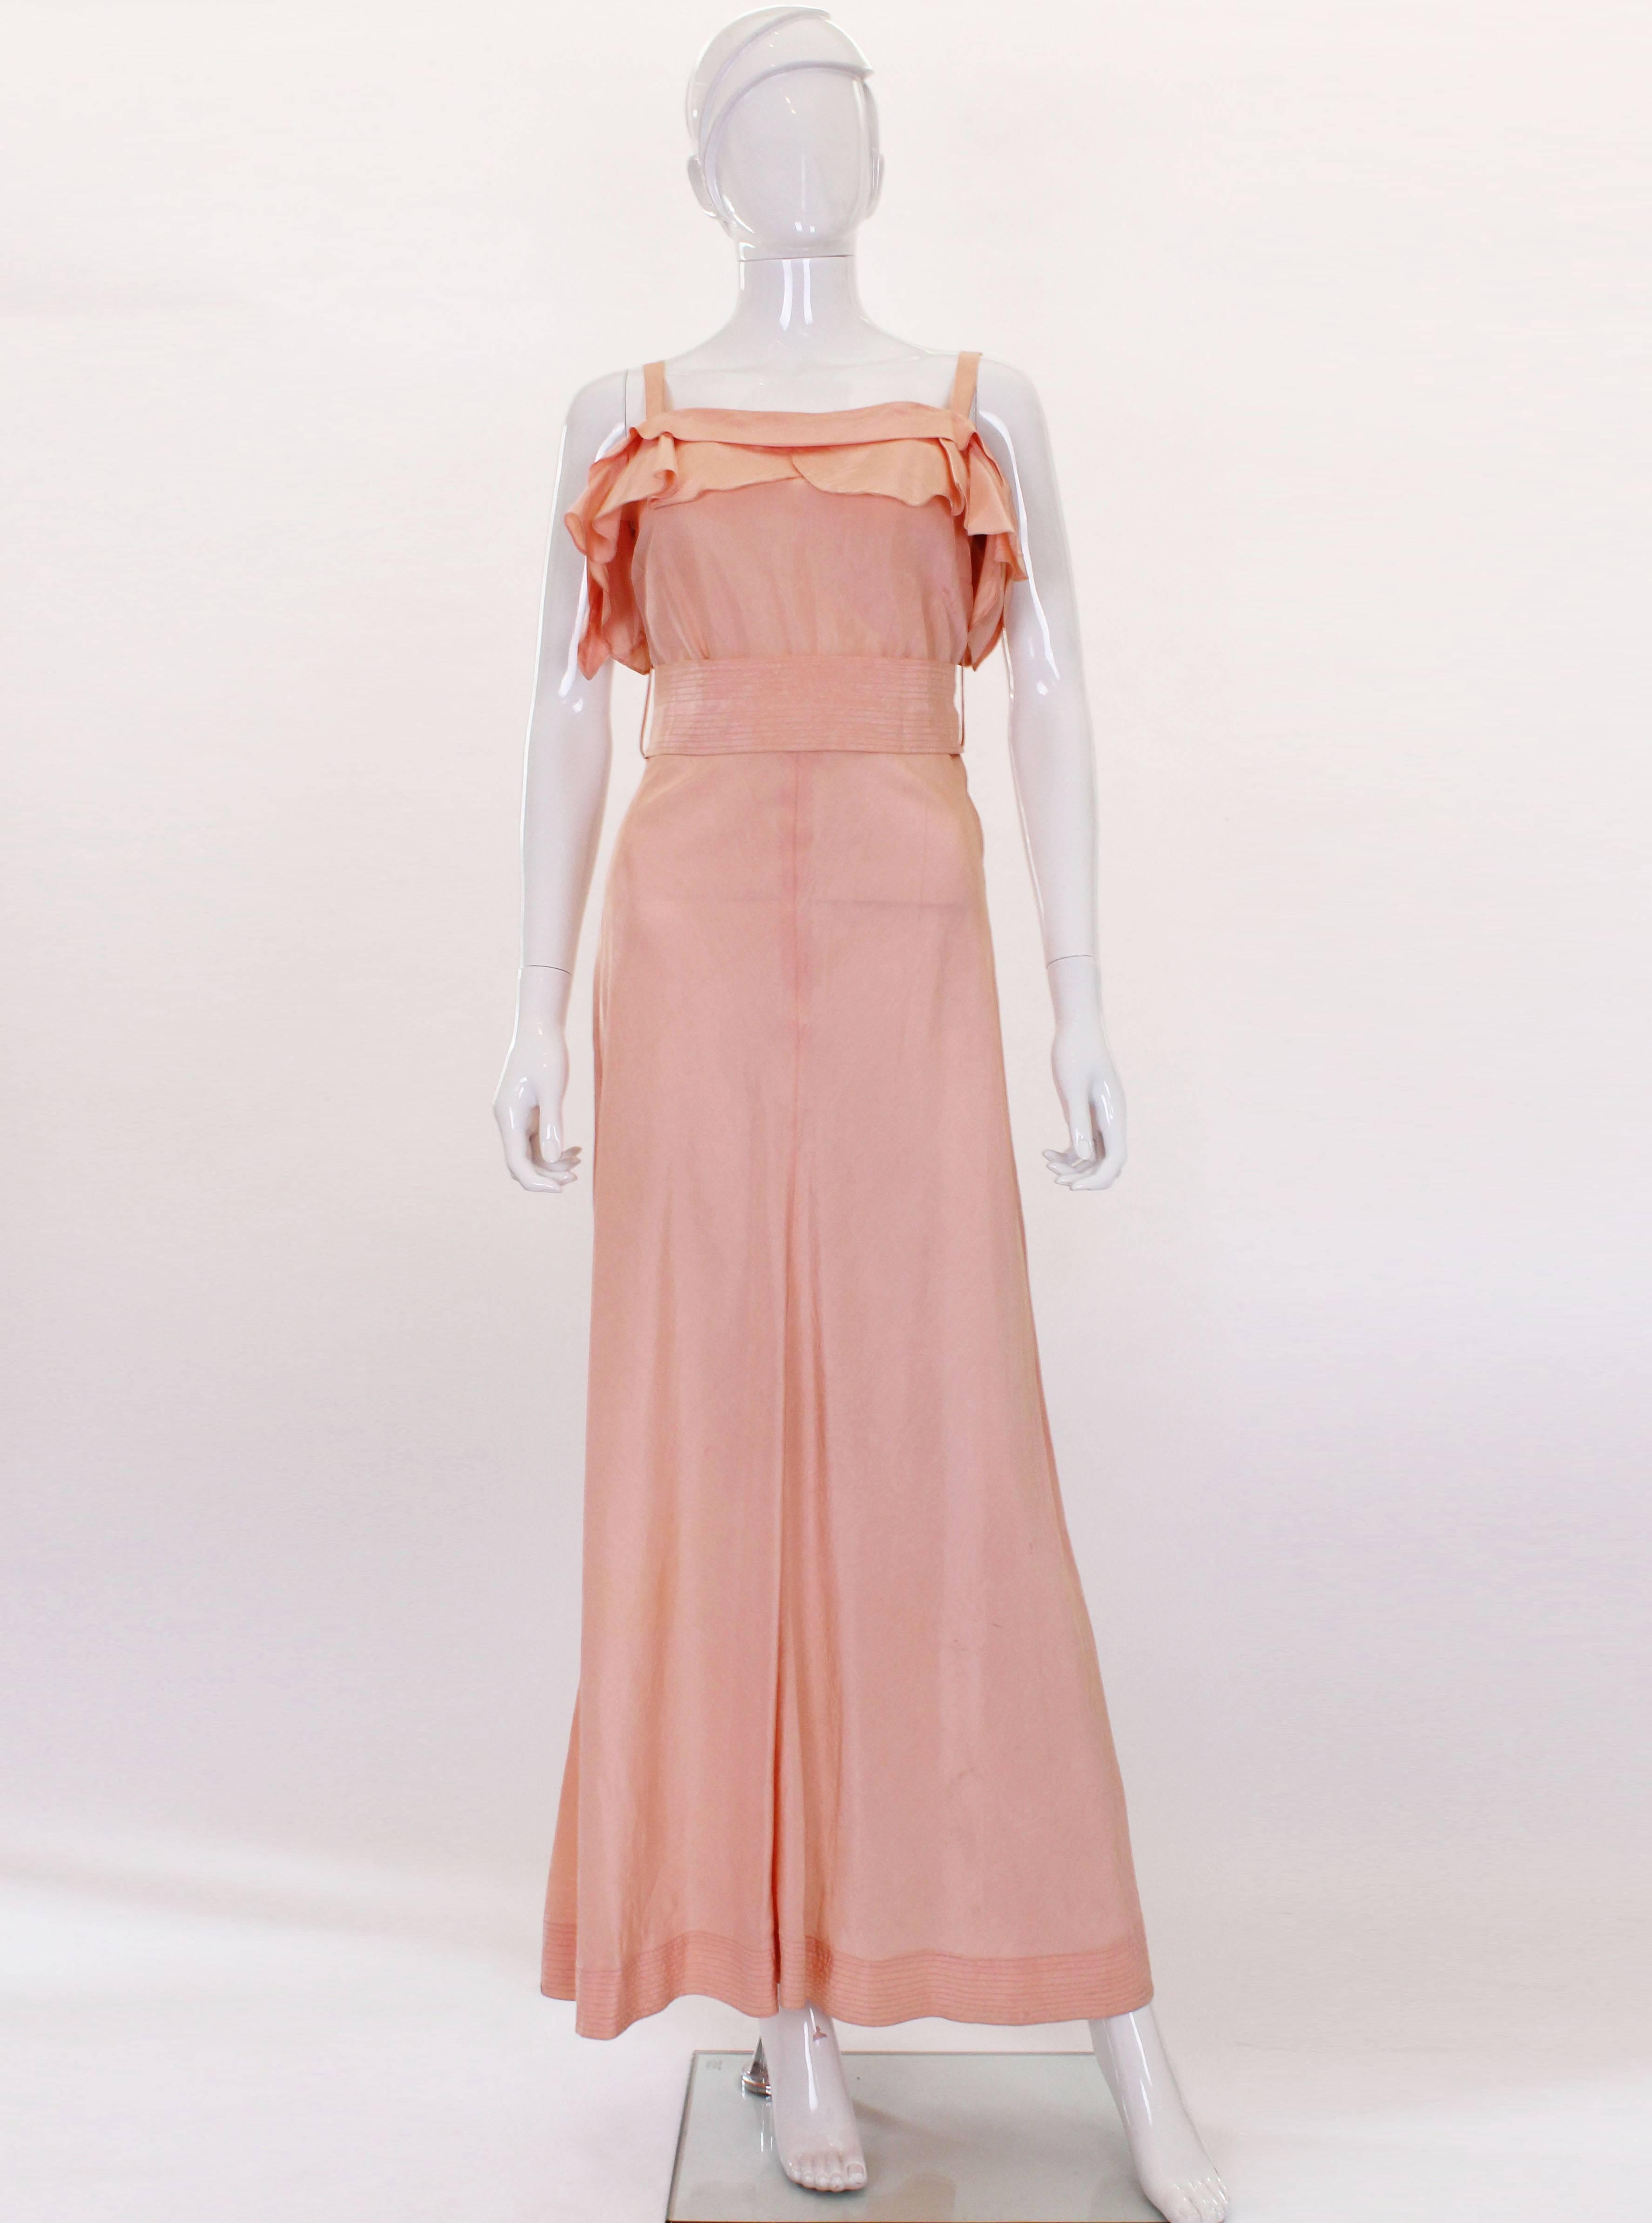 A stunning soft peach silk gown in exceptional condition from the 1940s. The dress has thin straps, with two layers of frills on the front and back of the neck. It opens with poppers down the side. The skirt of the dress flares out slightly and